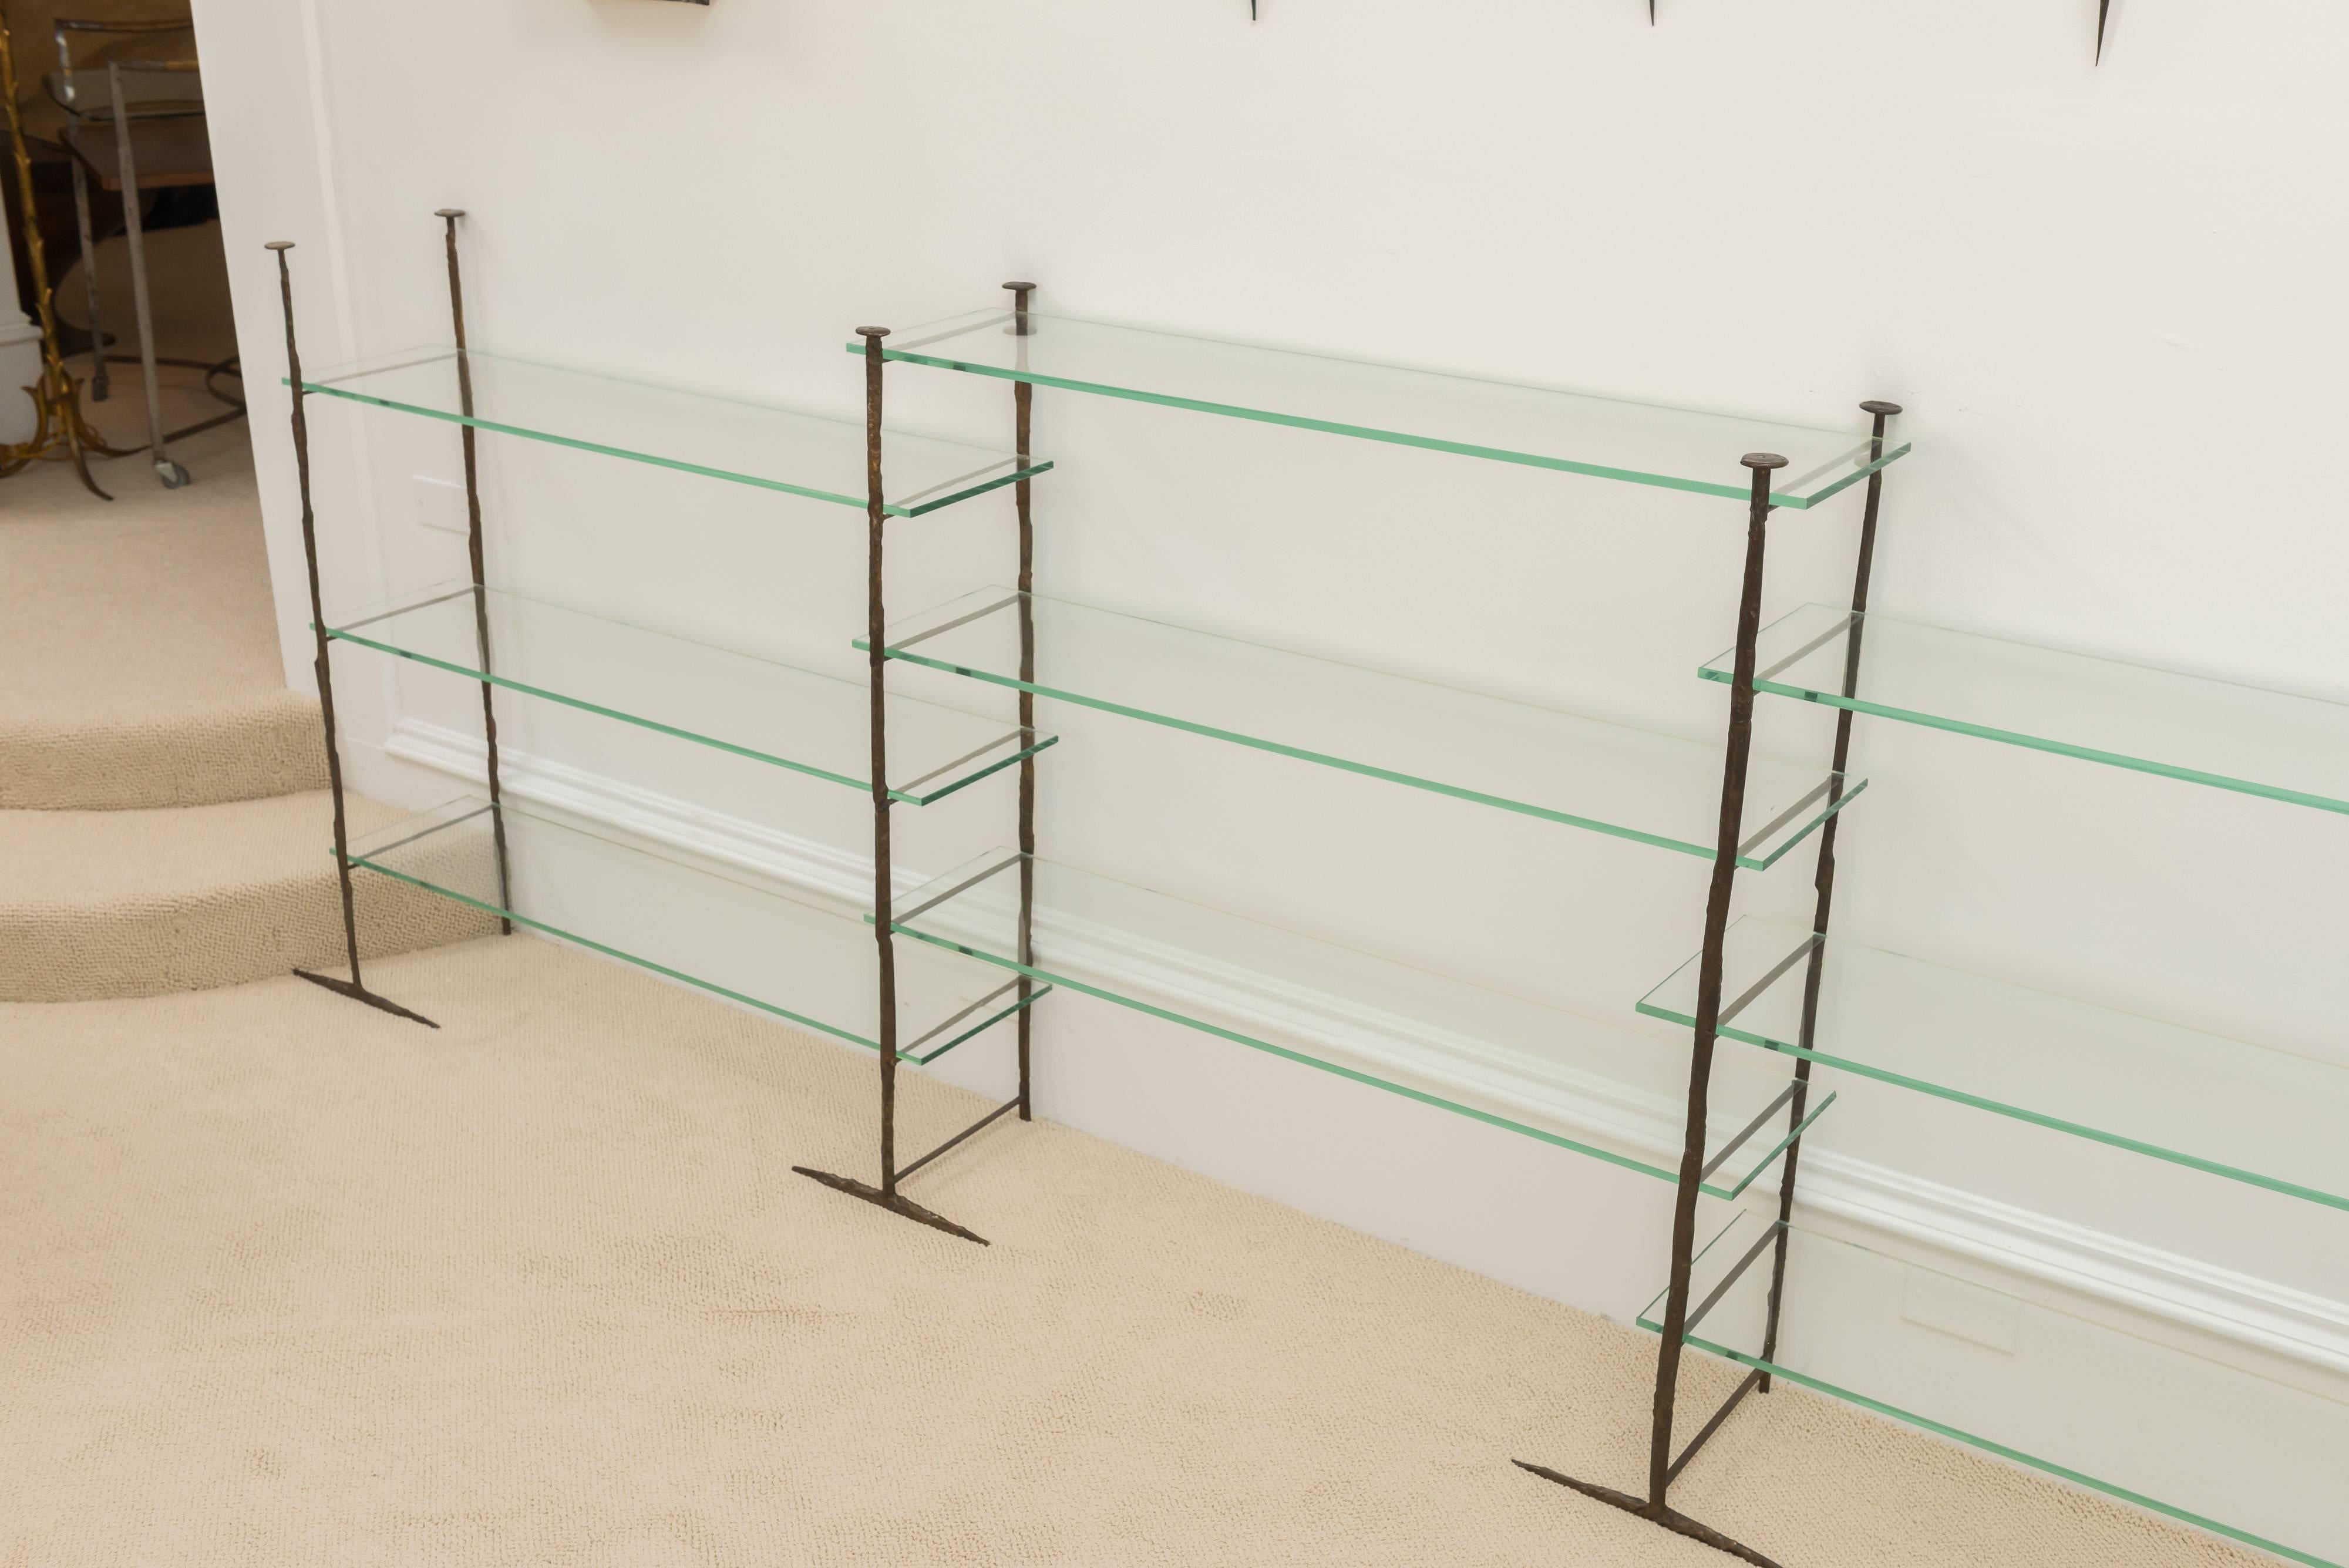 Jacques Duval-Brasseur patinated bronze and glass shelves etagere,
France, circa 1960.
Provenance: Collection of the Artist. Cannes, France.